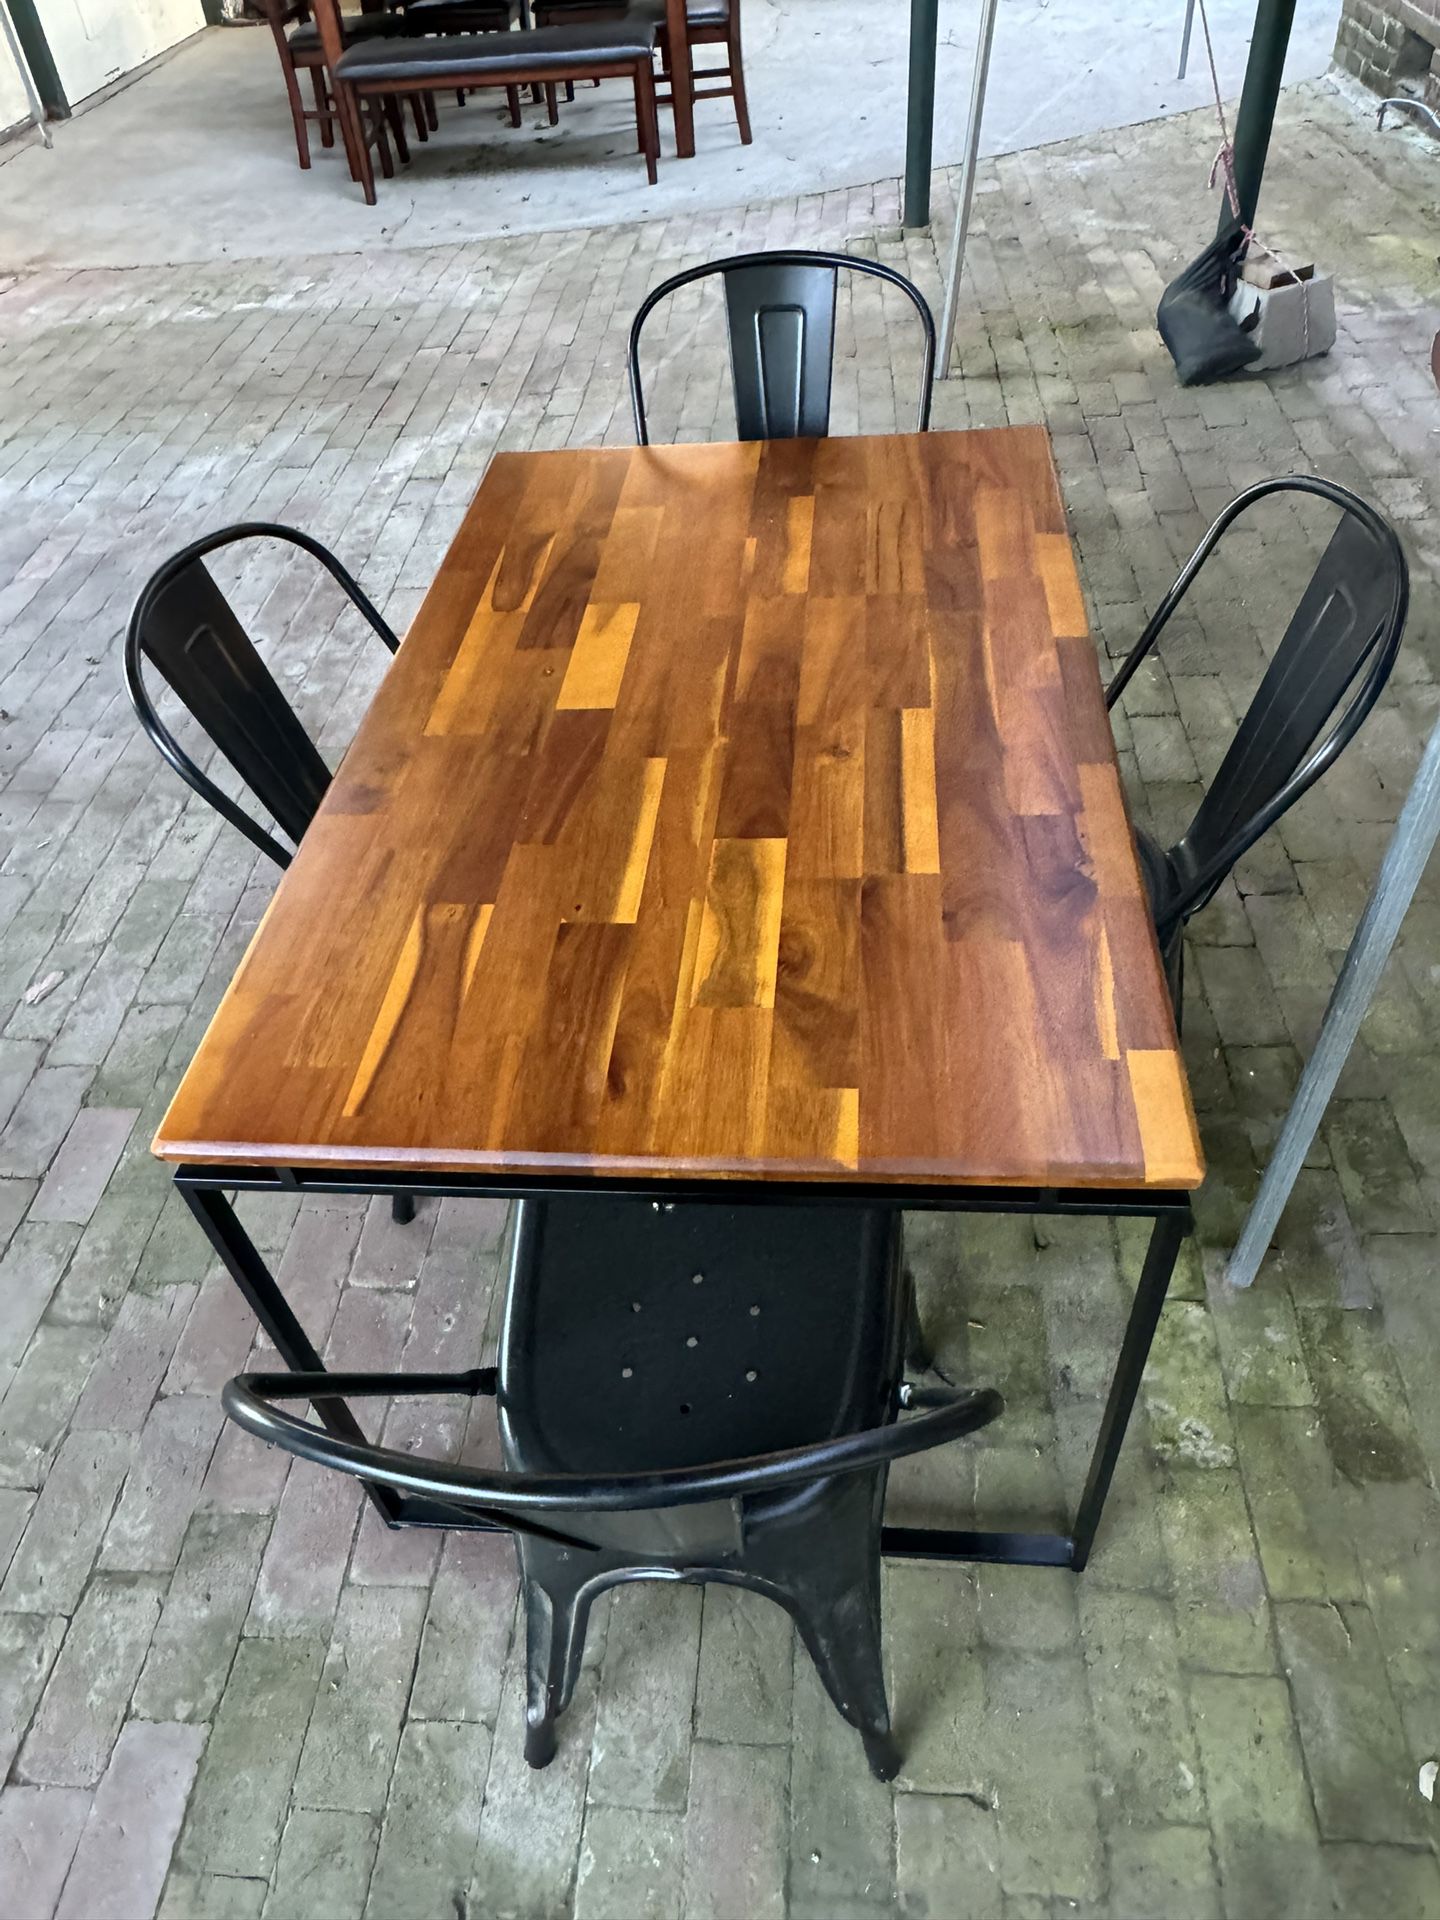 APARTMENT SIZE DINING TABLE WITH CHAIRS